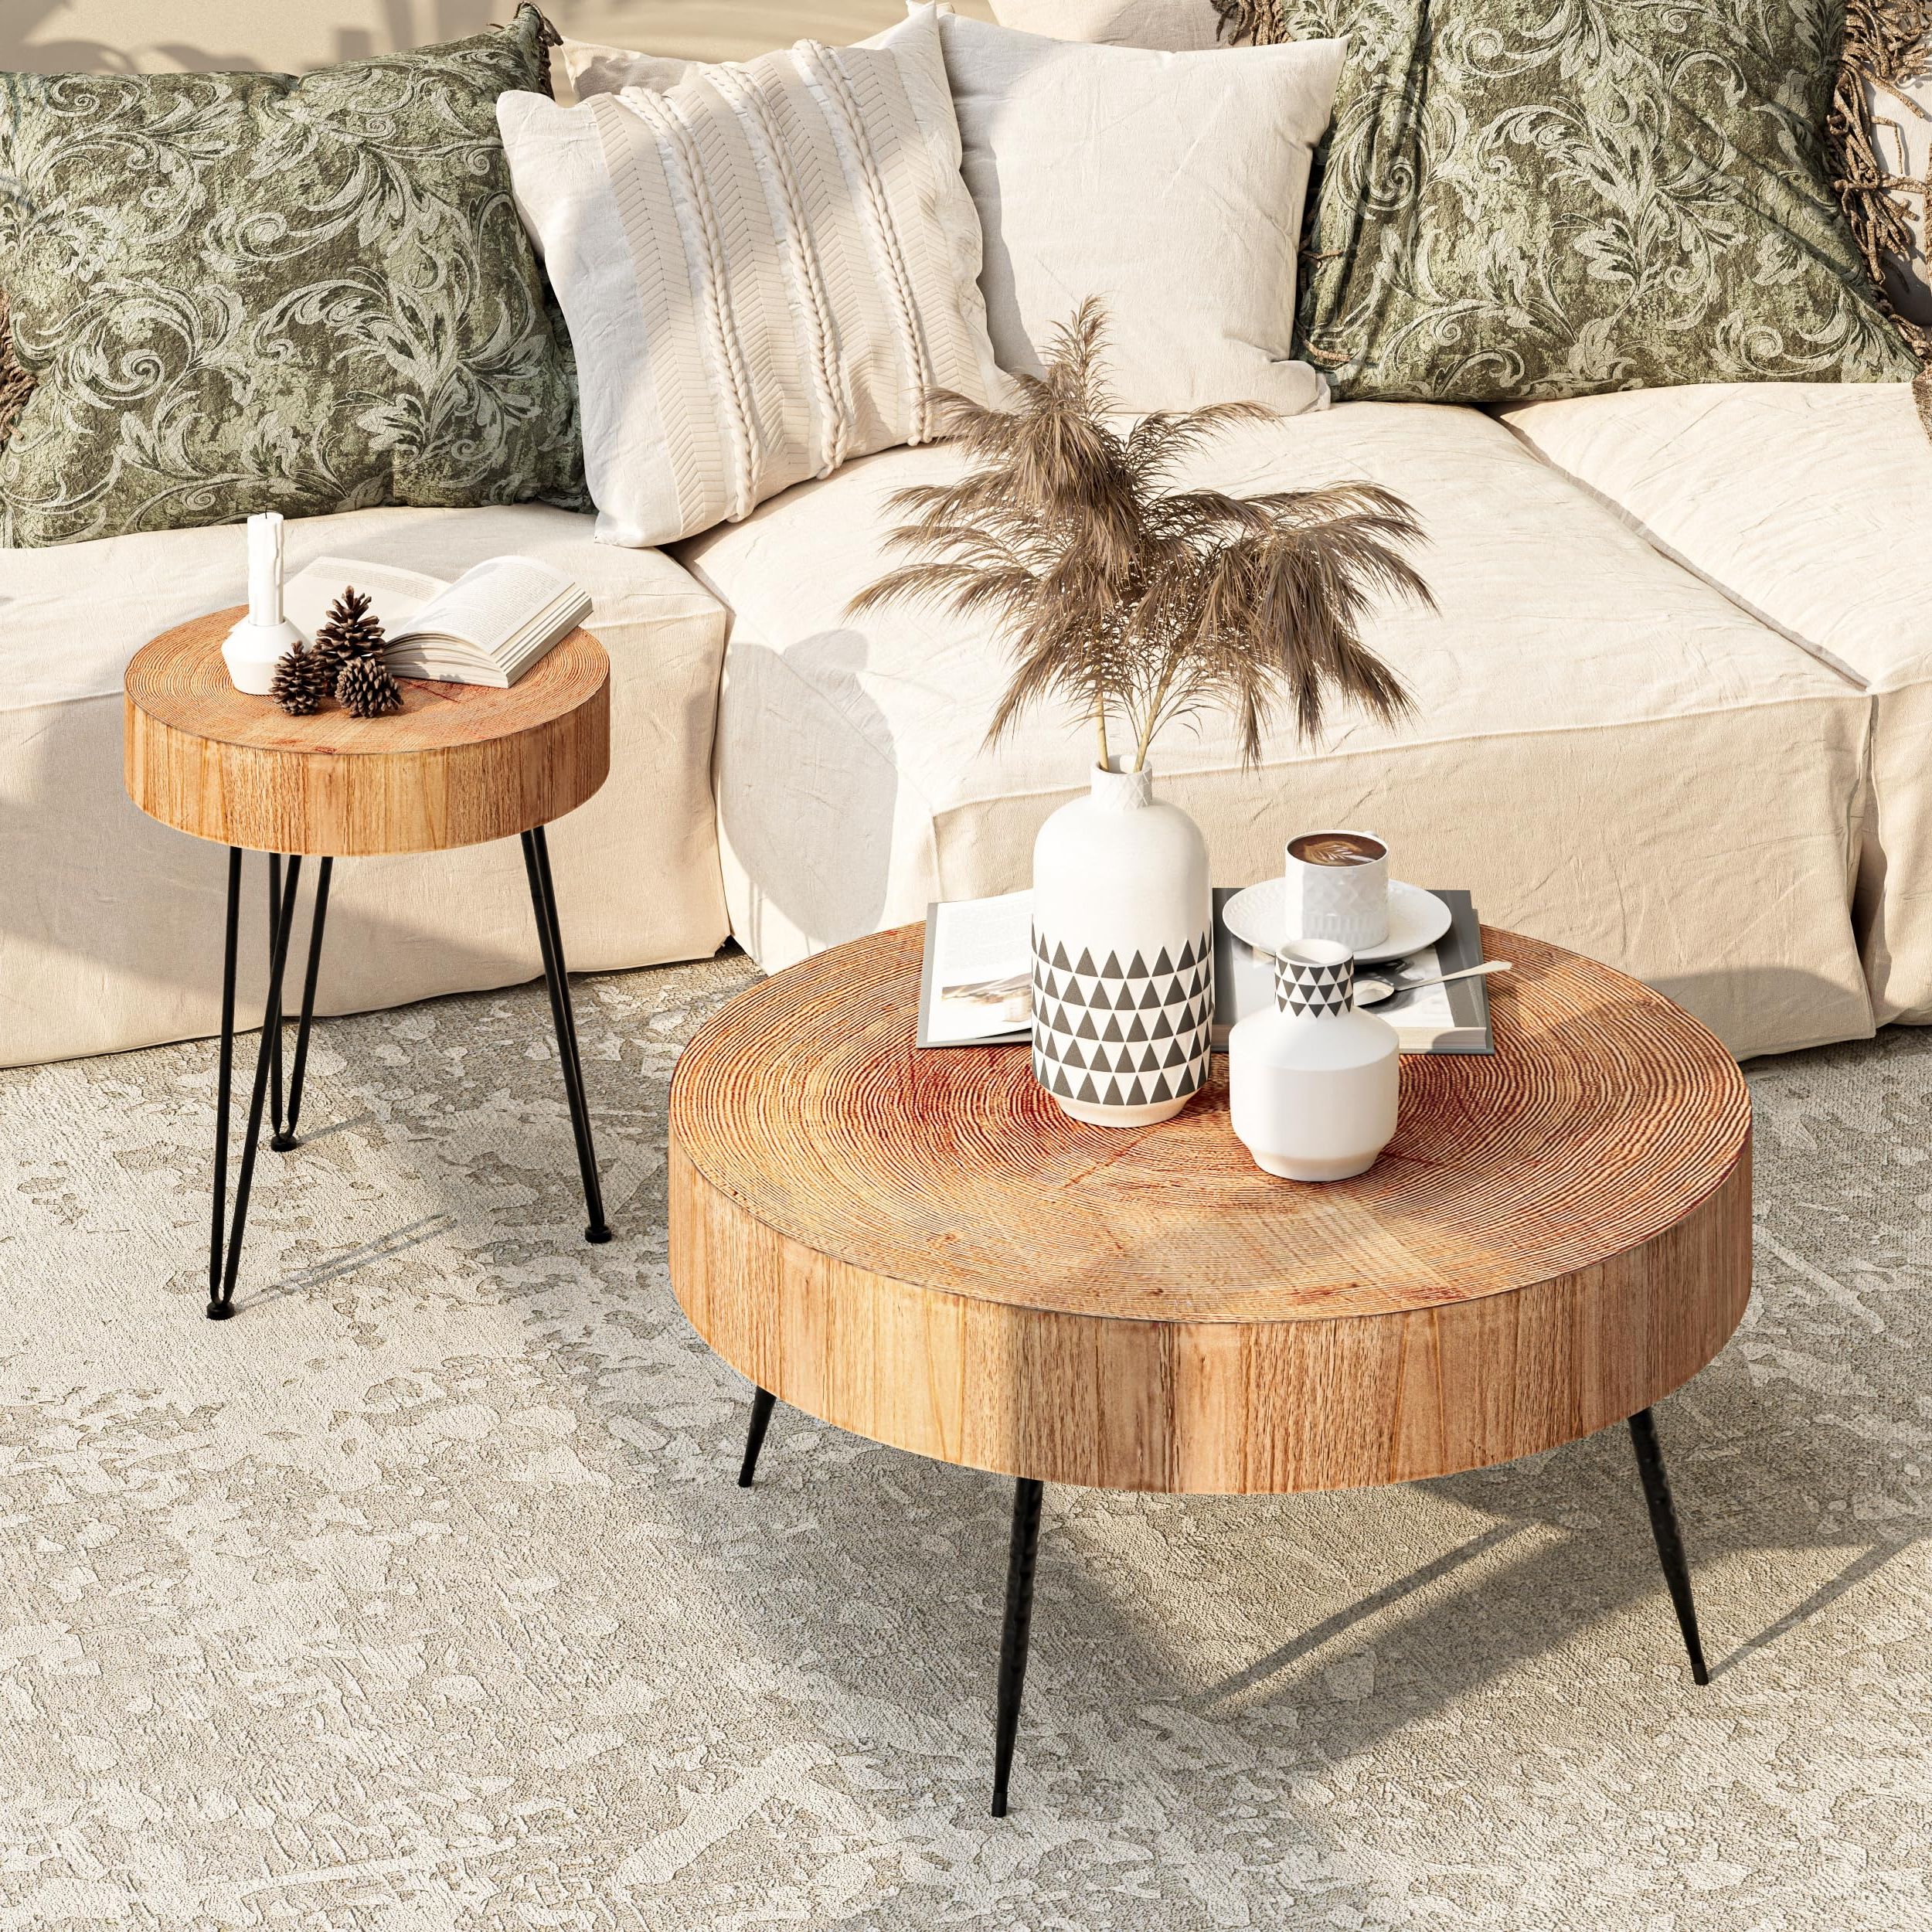 Modern Farmhouse Coffee Table Sets Throughout Best And Newest Amazon: Cozayh 2 Piece Modern Farmhouse Living Room Coffee Table Set,  Nesting Table Round Natural Finish With Handcrafted Wood Ring Motif, Light  Red + Wood Color : Home & Kitchen (Photo 1 of 10)